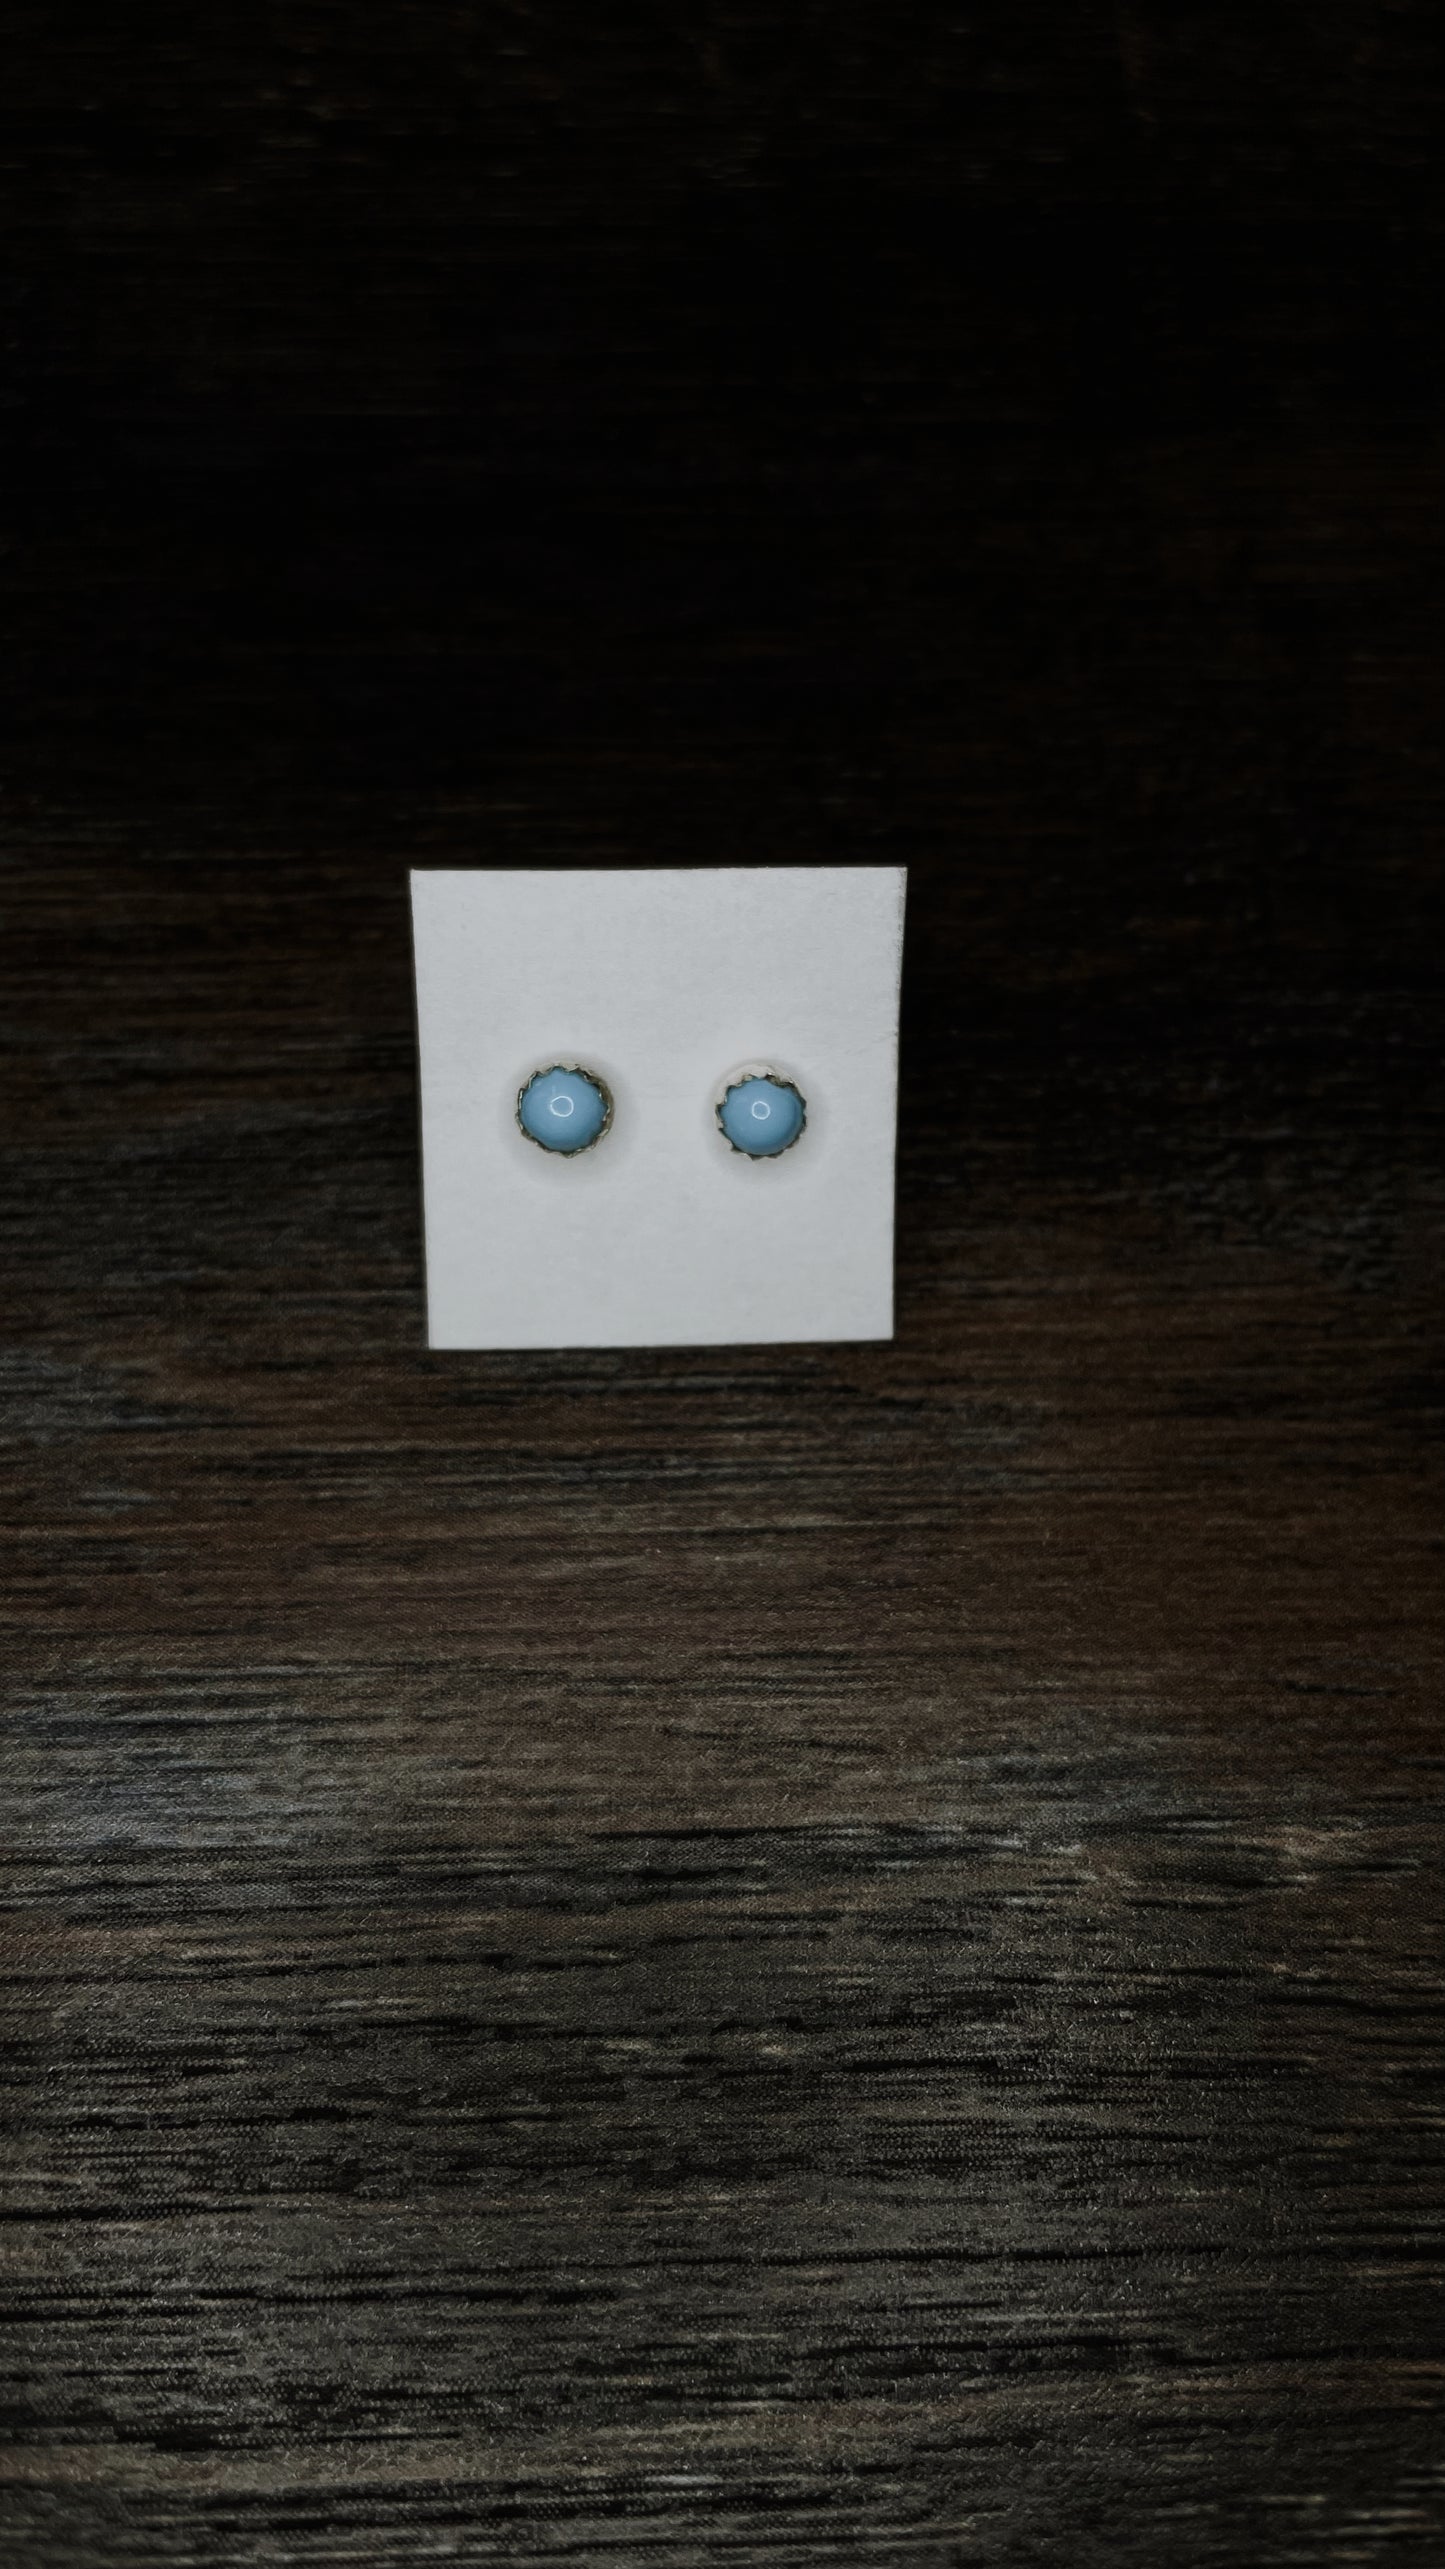 Baby Turquoise Studs